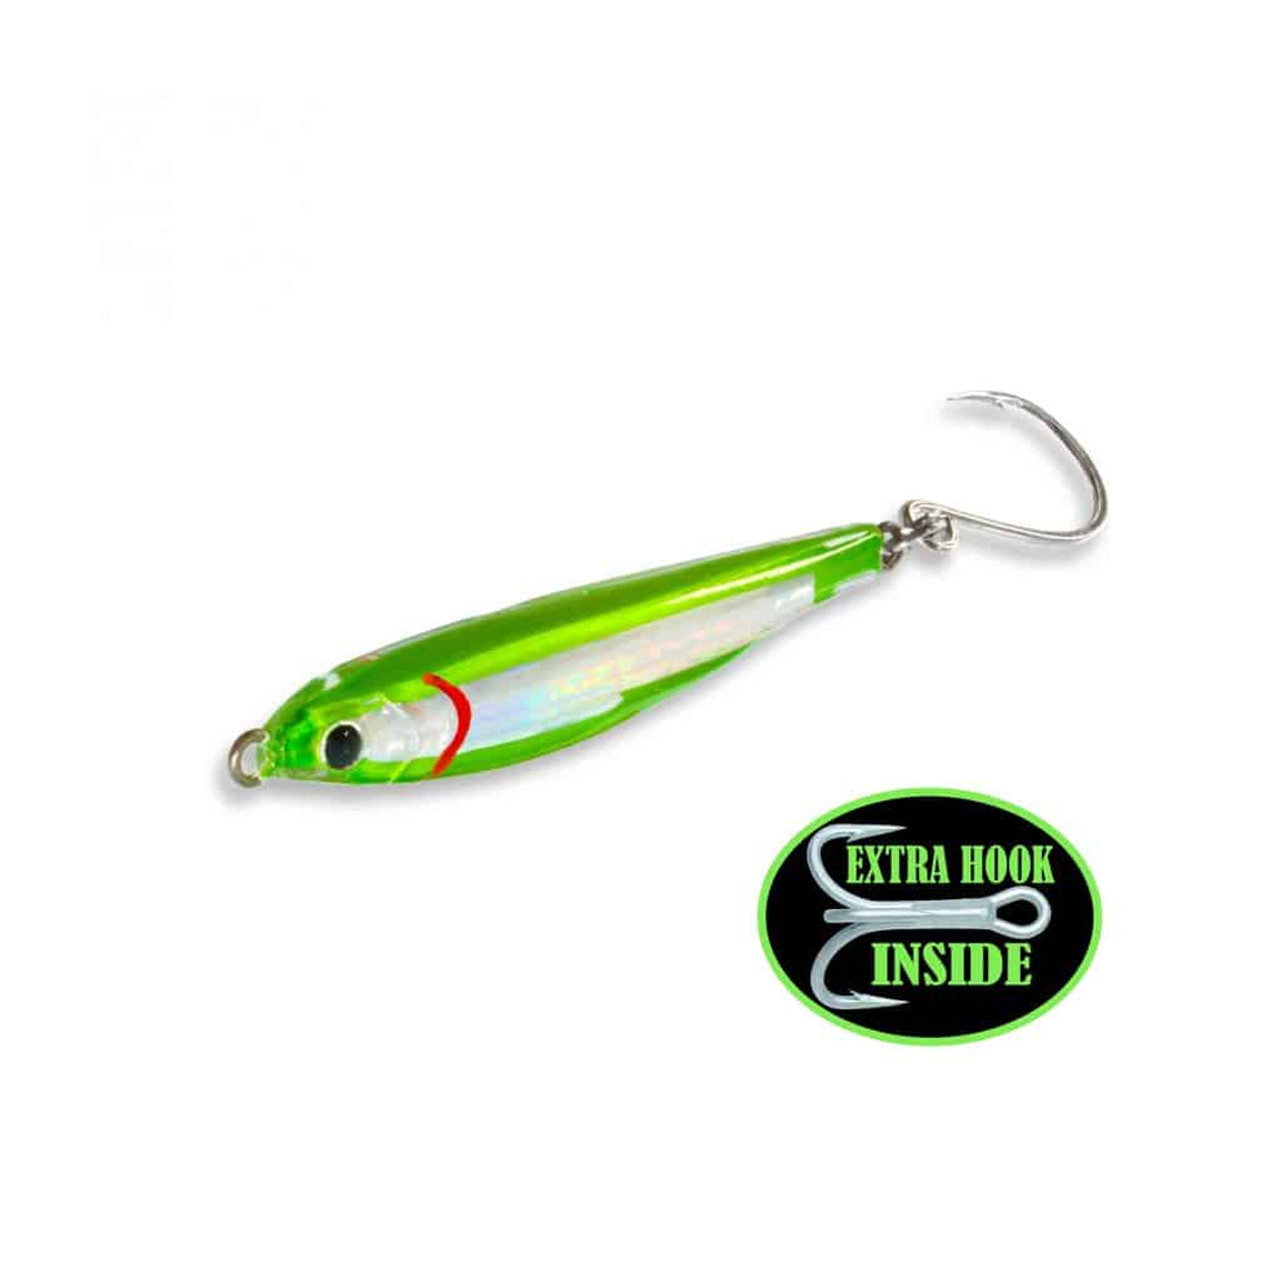 Fat Cow Lures Fat Minnow Epoxy Resin Jig 3.5 Inch 2 Ounce Green